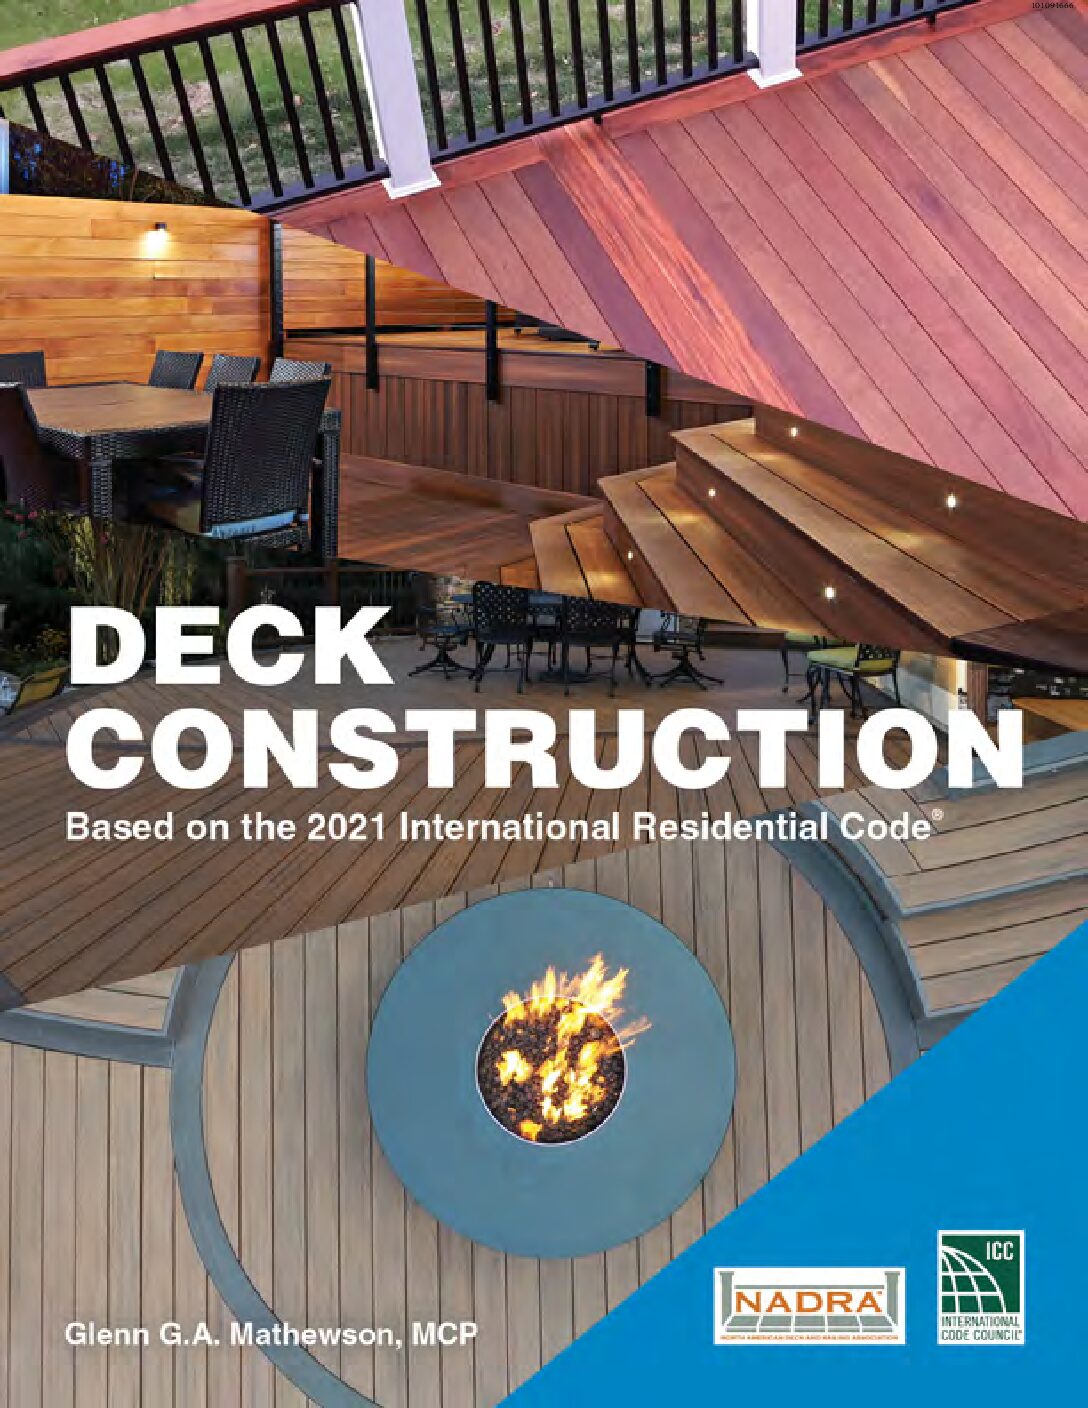 Deck Construction: Based on the 2021 URC